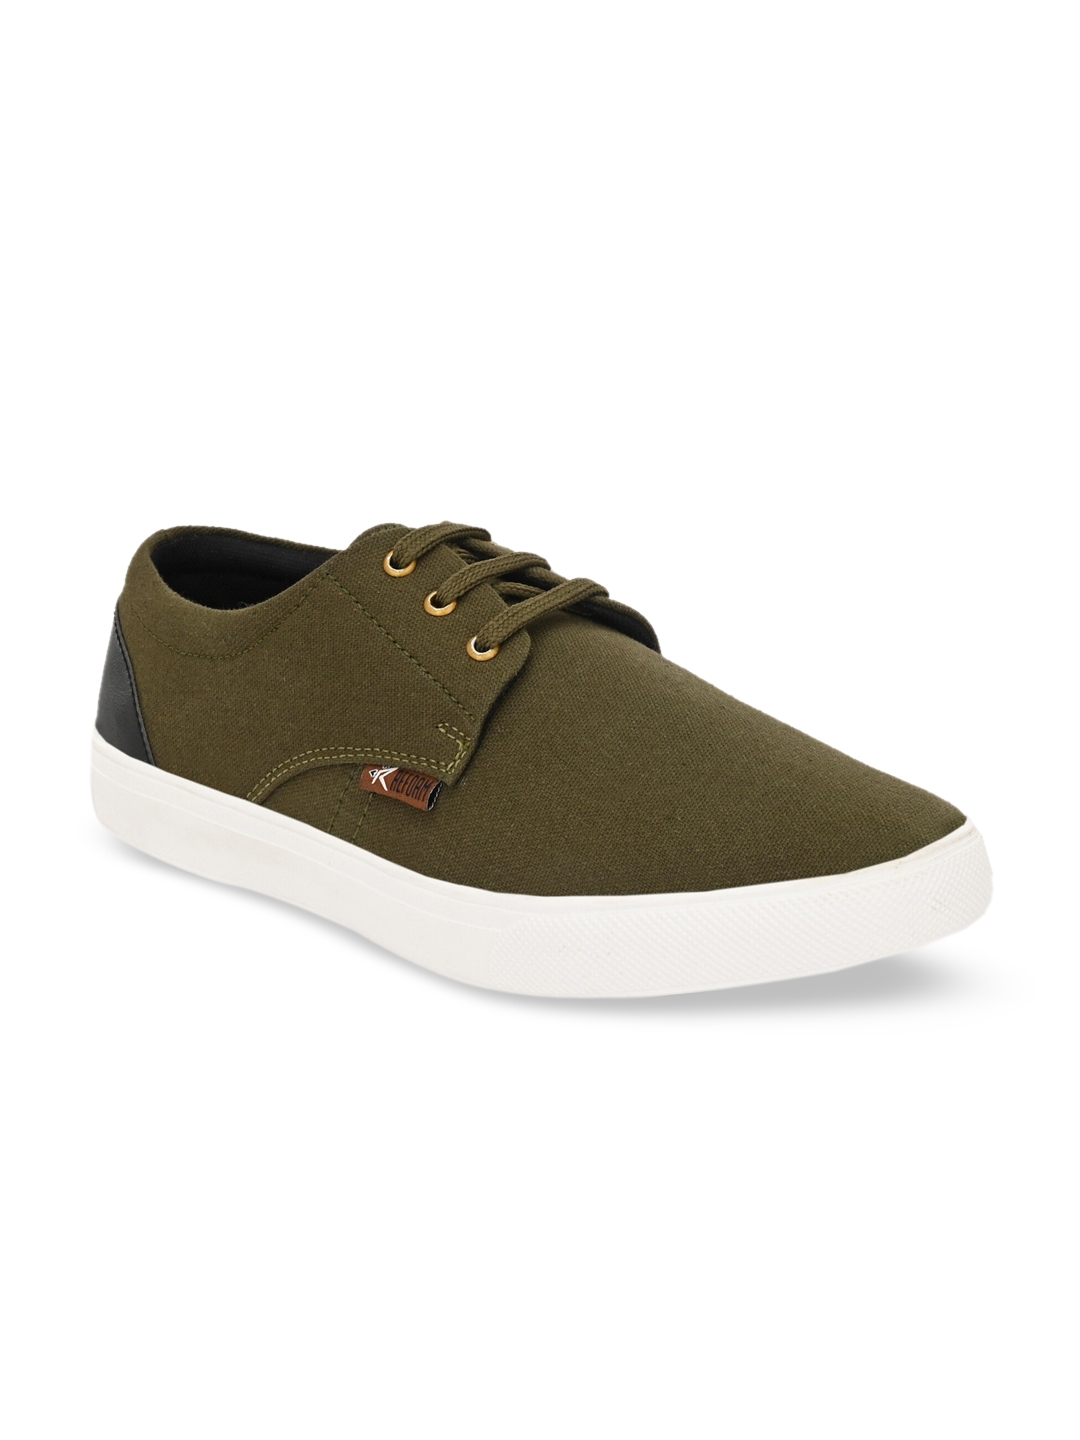 Buy REFOAM Men Olive Green & White Solid Canvas Sneakers - Casual Shoes ...